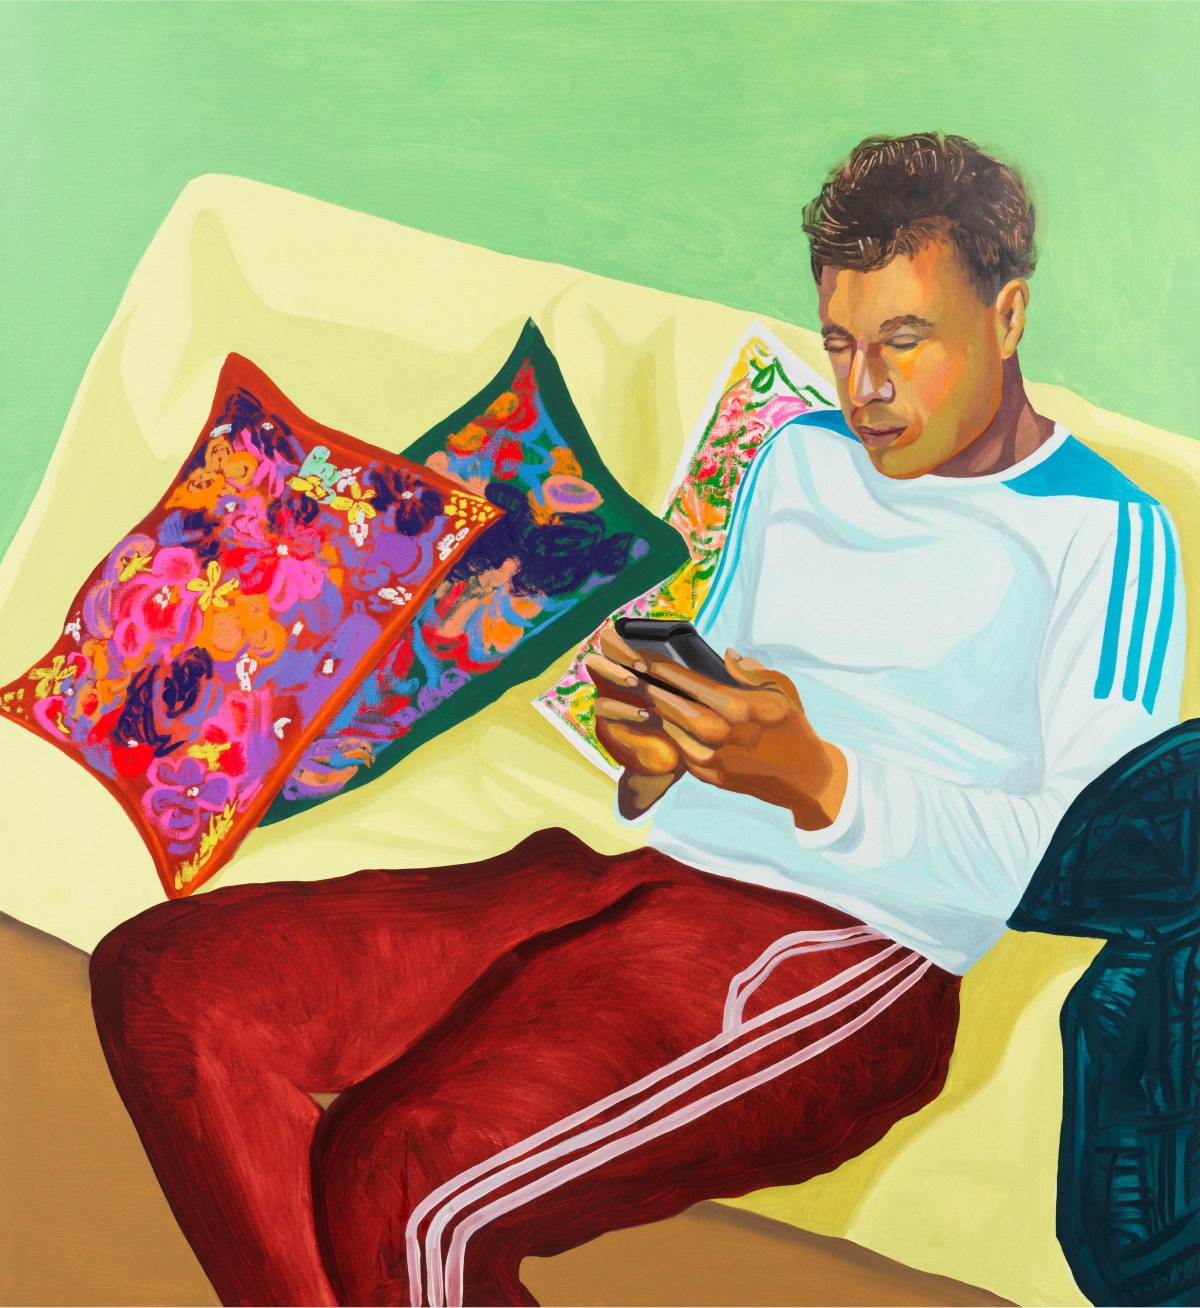 Nisenbaum’s “Gustavo” featuring a man seated on a yellow couch with colorfully printed pillows looking at his smartphone